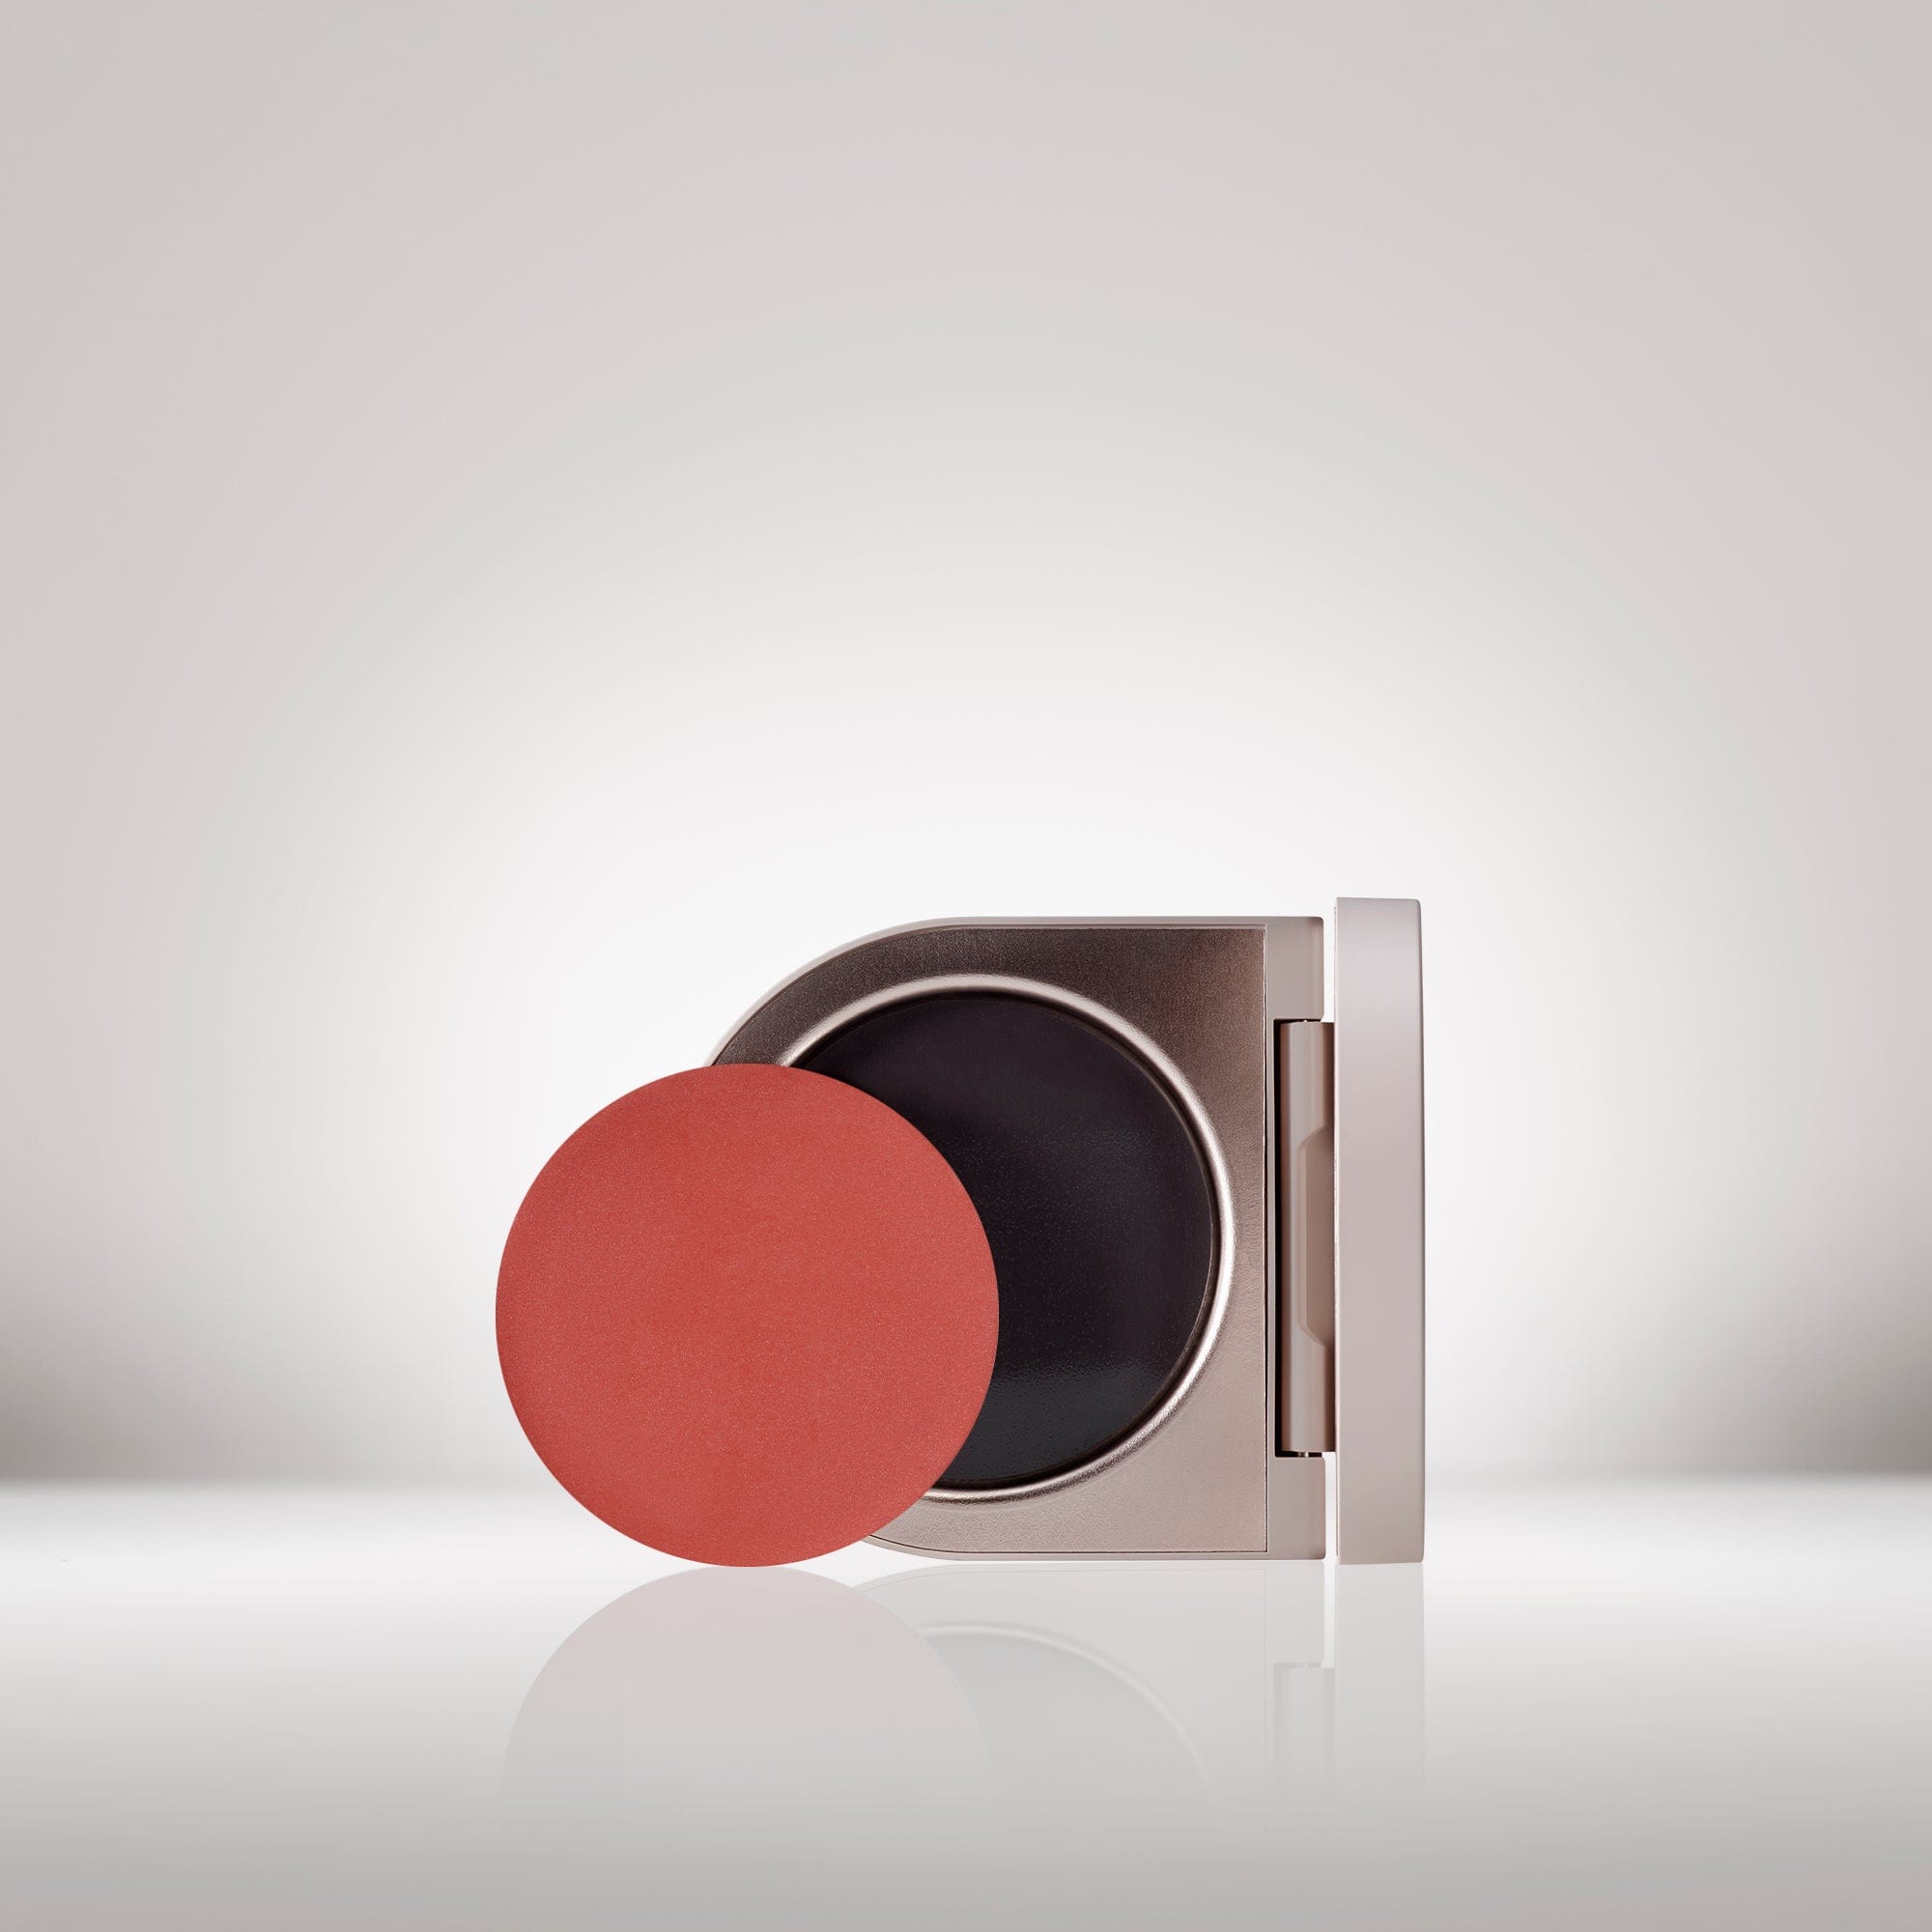 Image of the Cream Blush Refillable Cheek & Lip Color in Anemone in front of the open compact - Cream blush